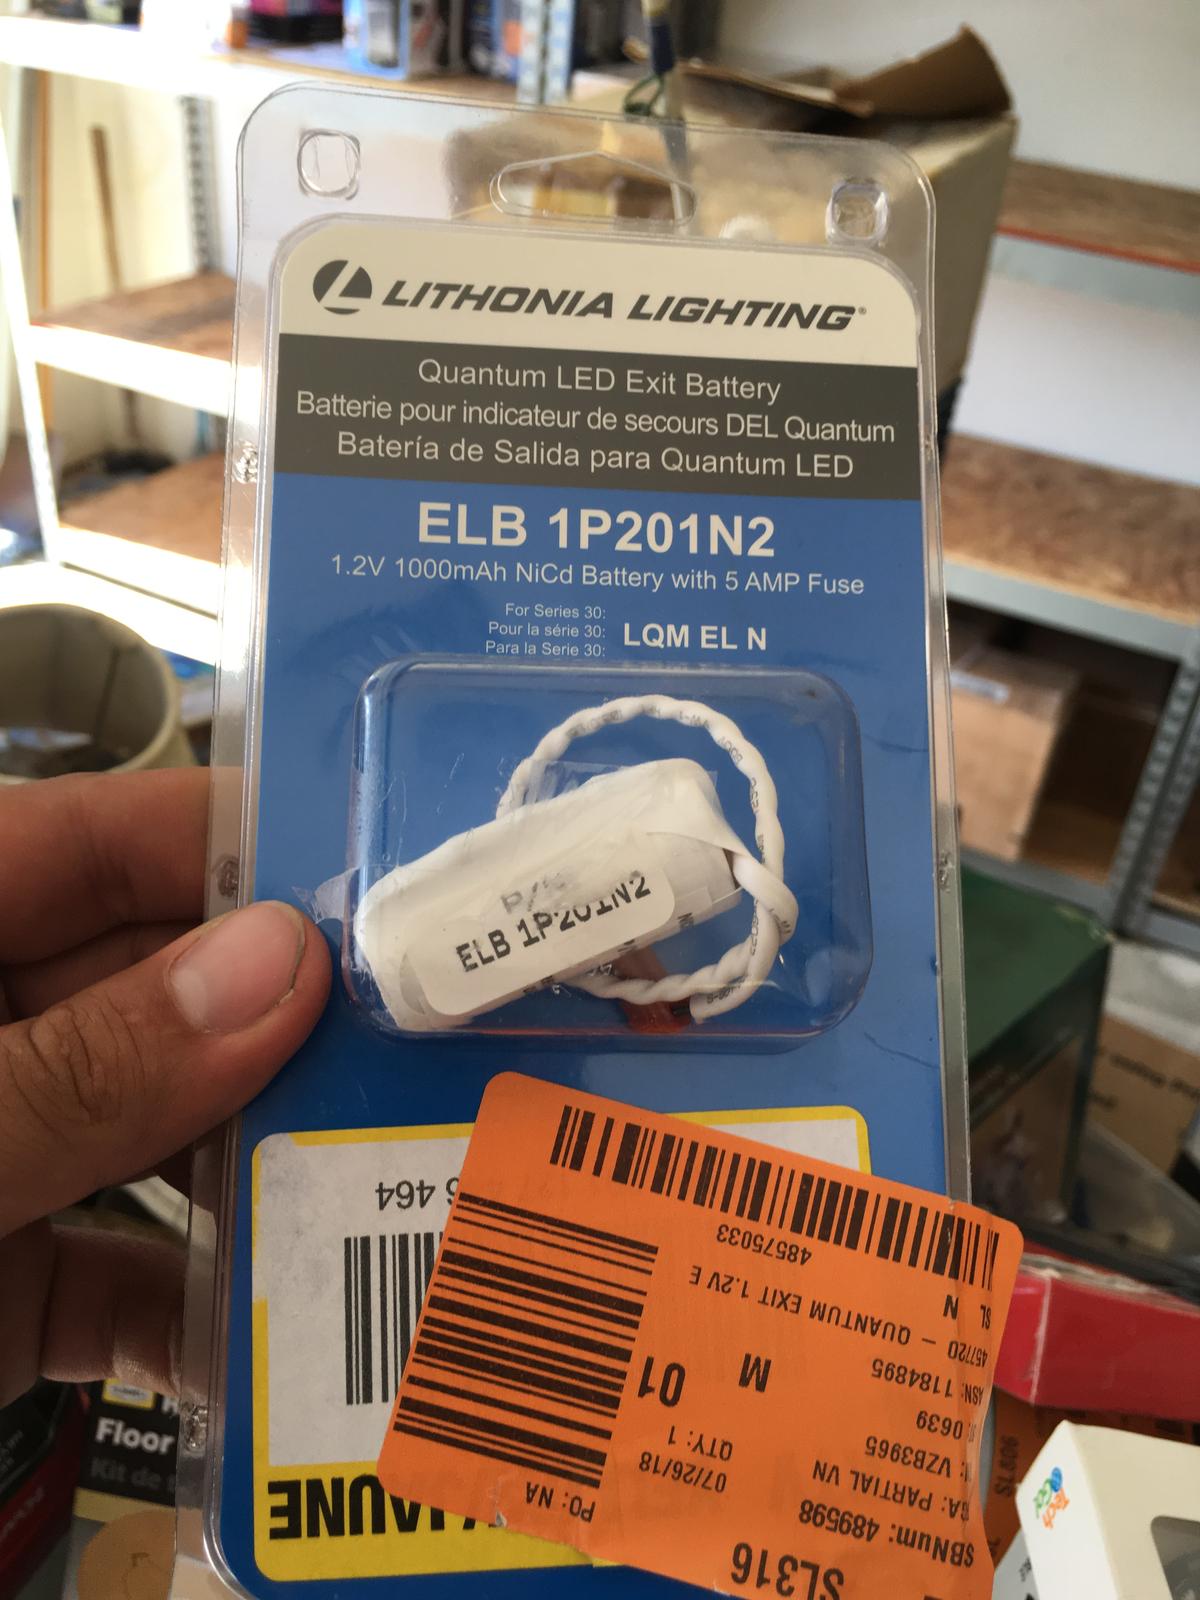 *Lithonia Lighting ELB 1P201N2 M50 Quantum 1.2V Exit Replacement Battery  $20/30